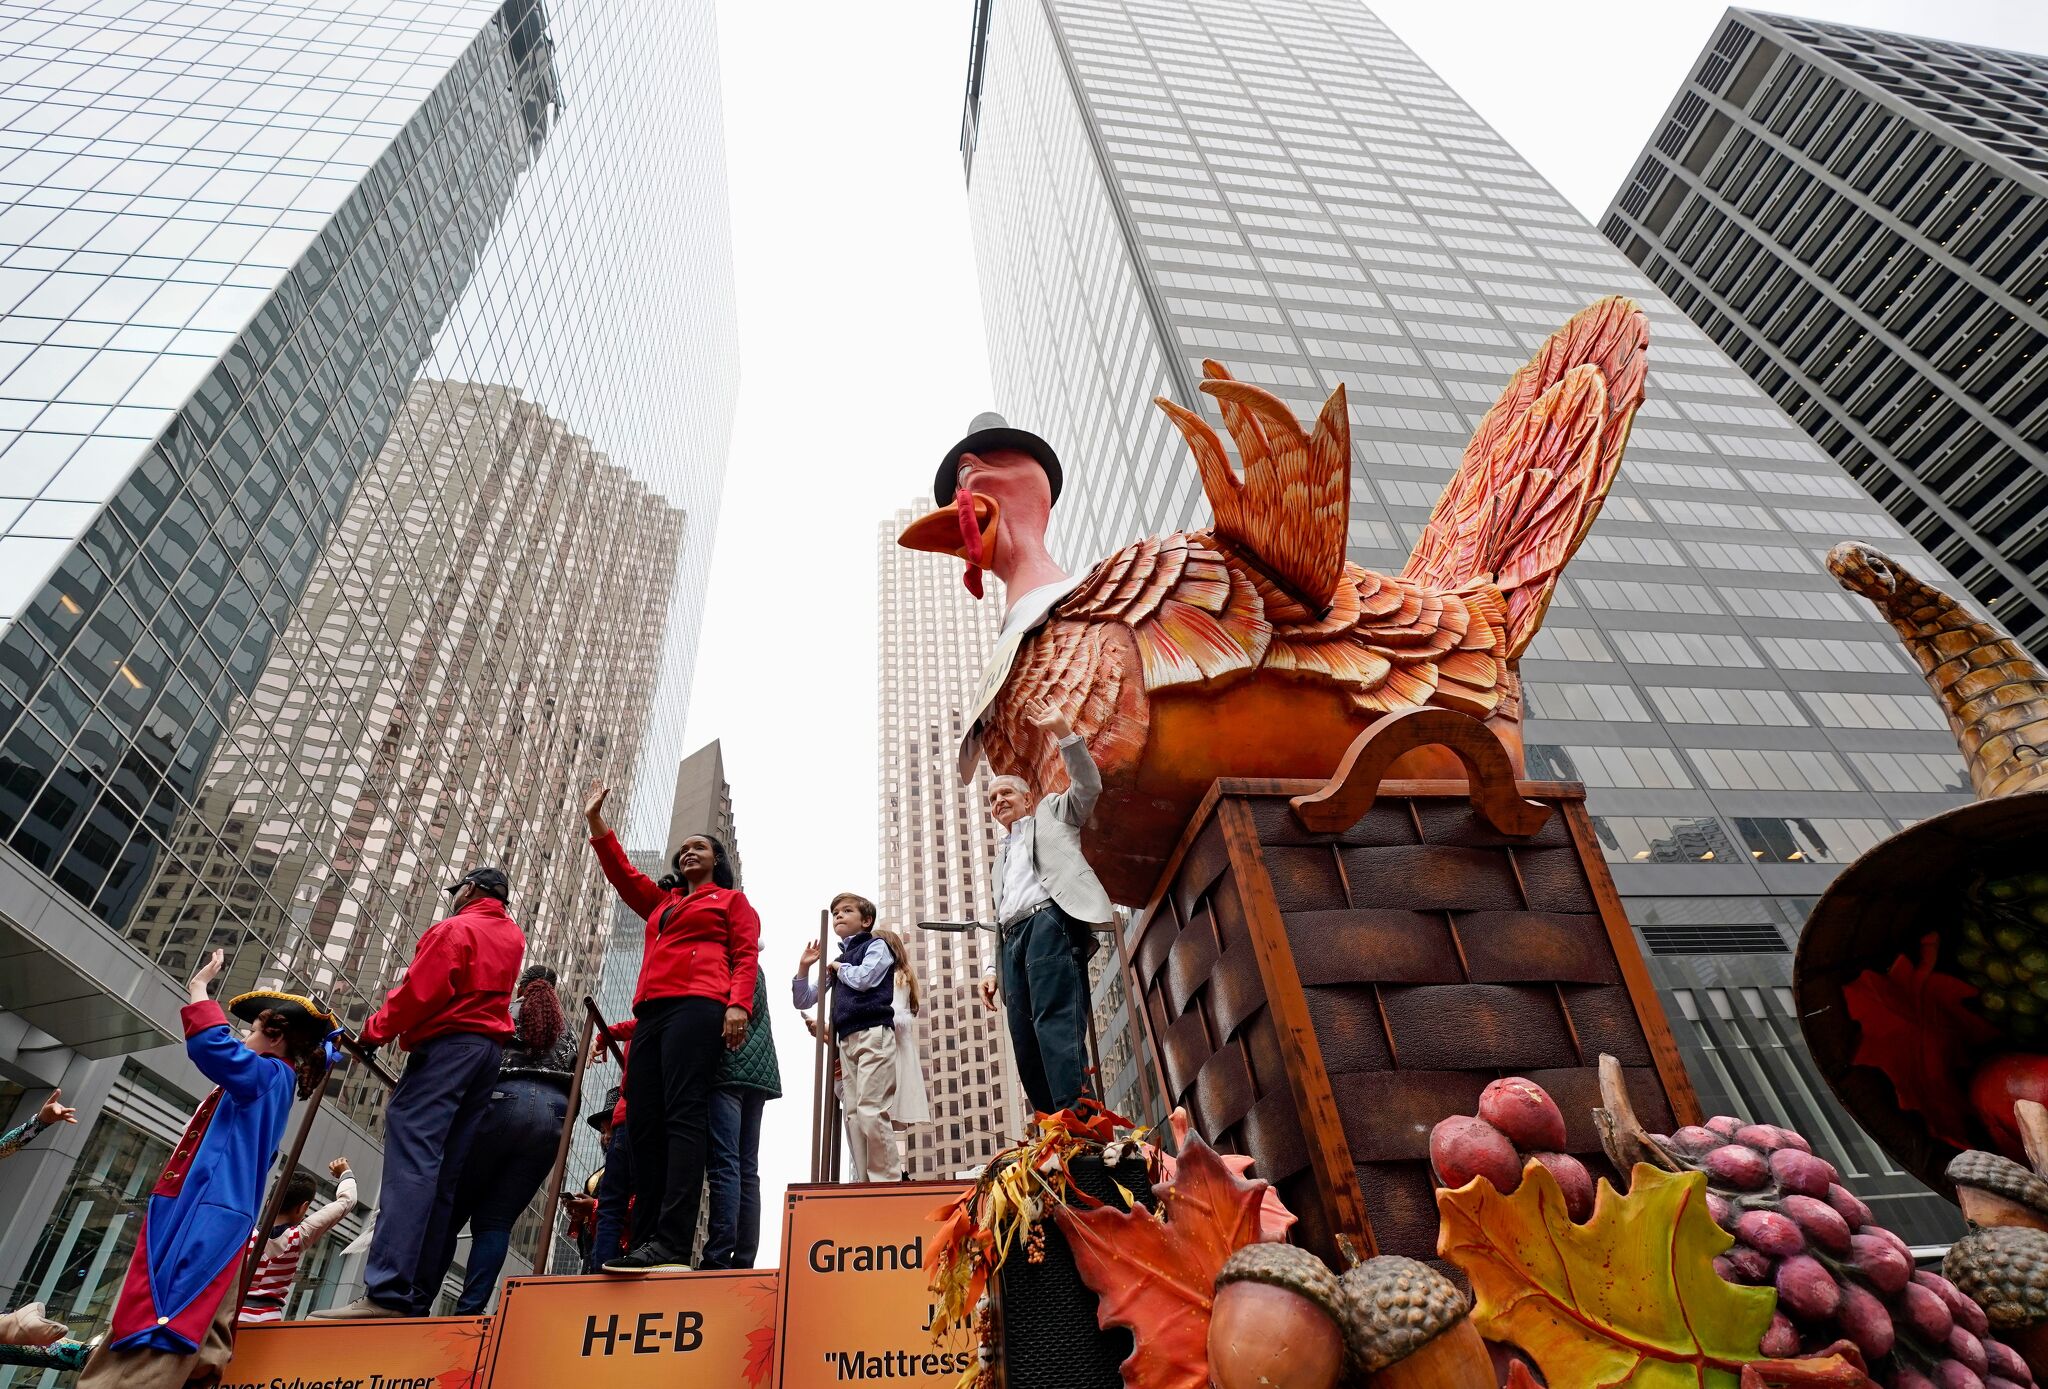 What to know if you're going to Houston's Thanksgiving Parade